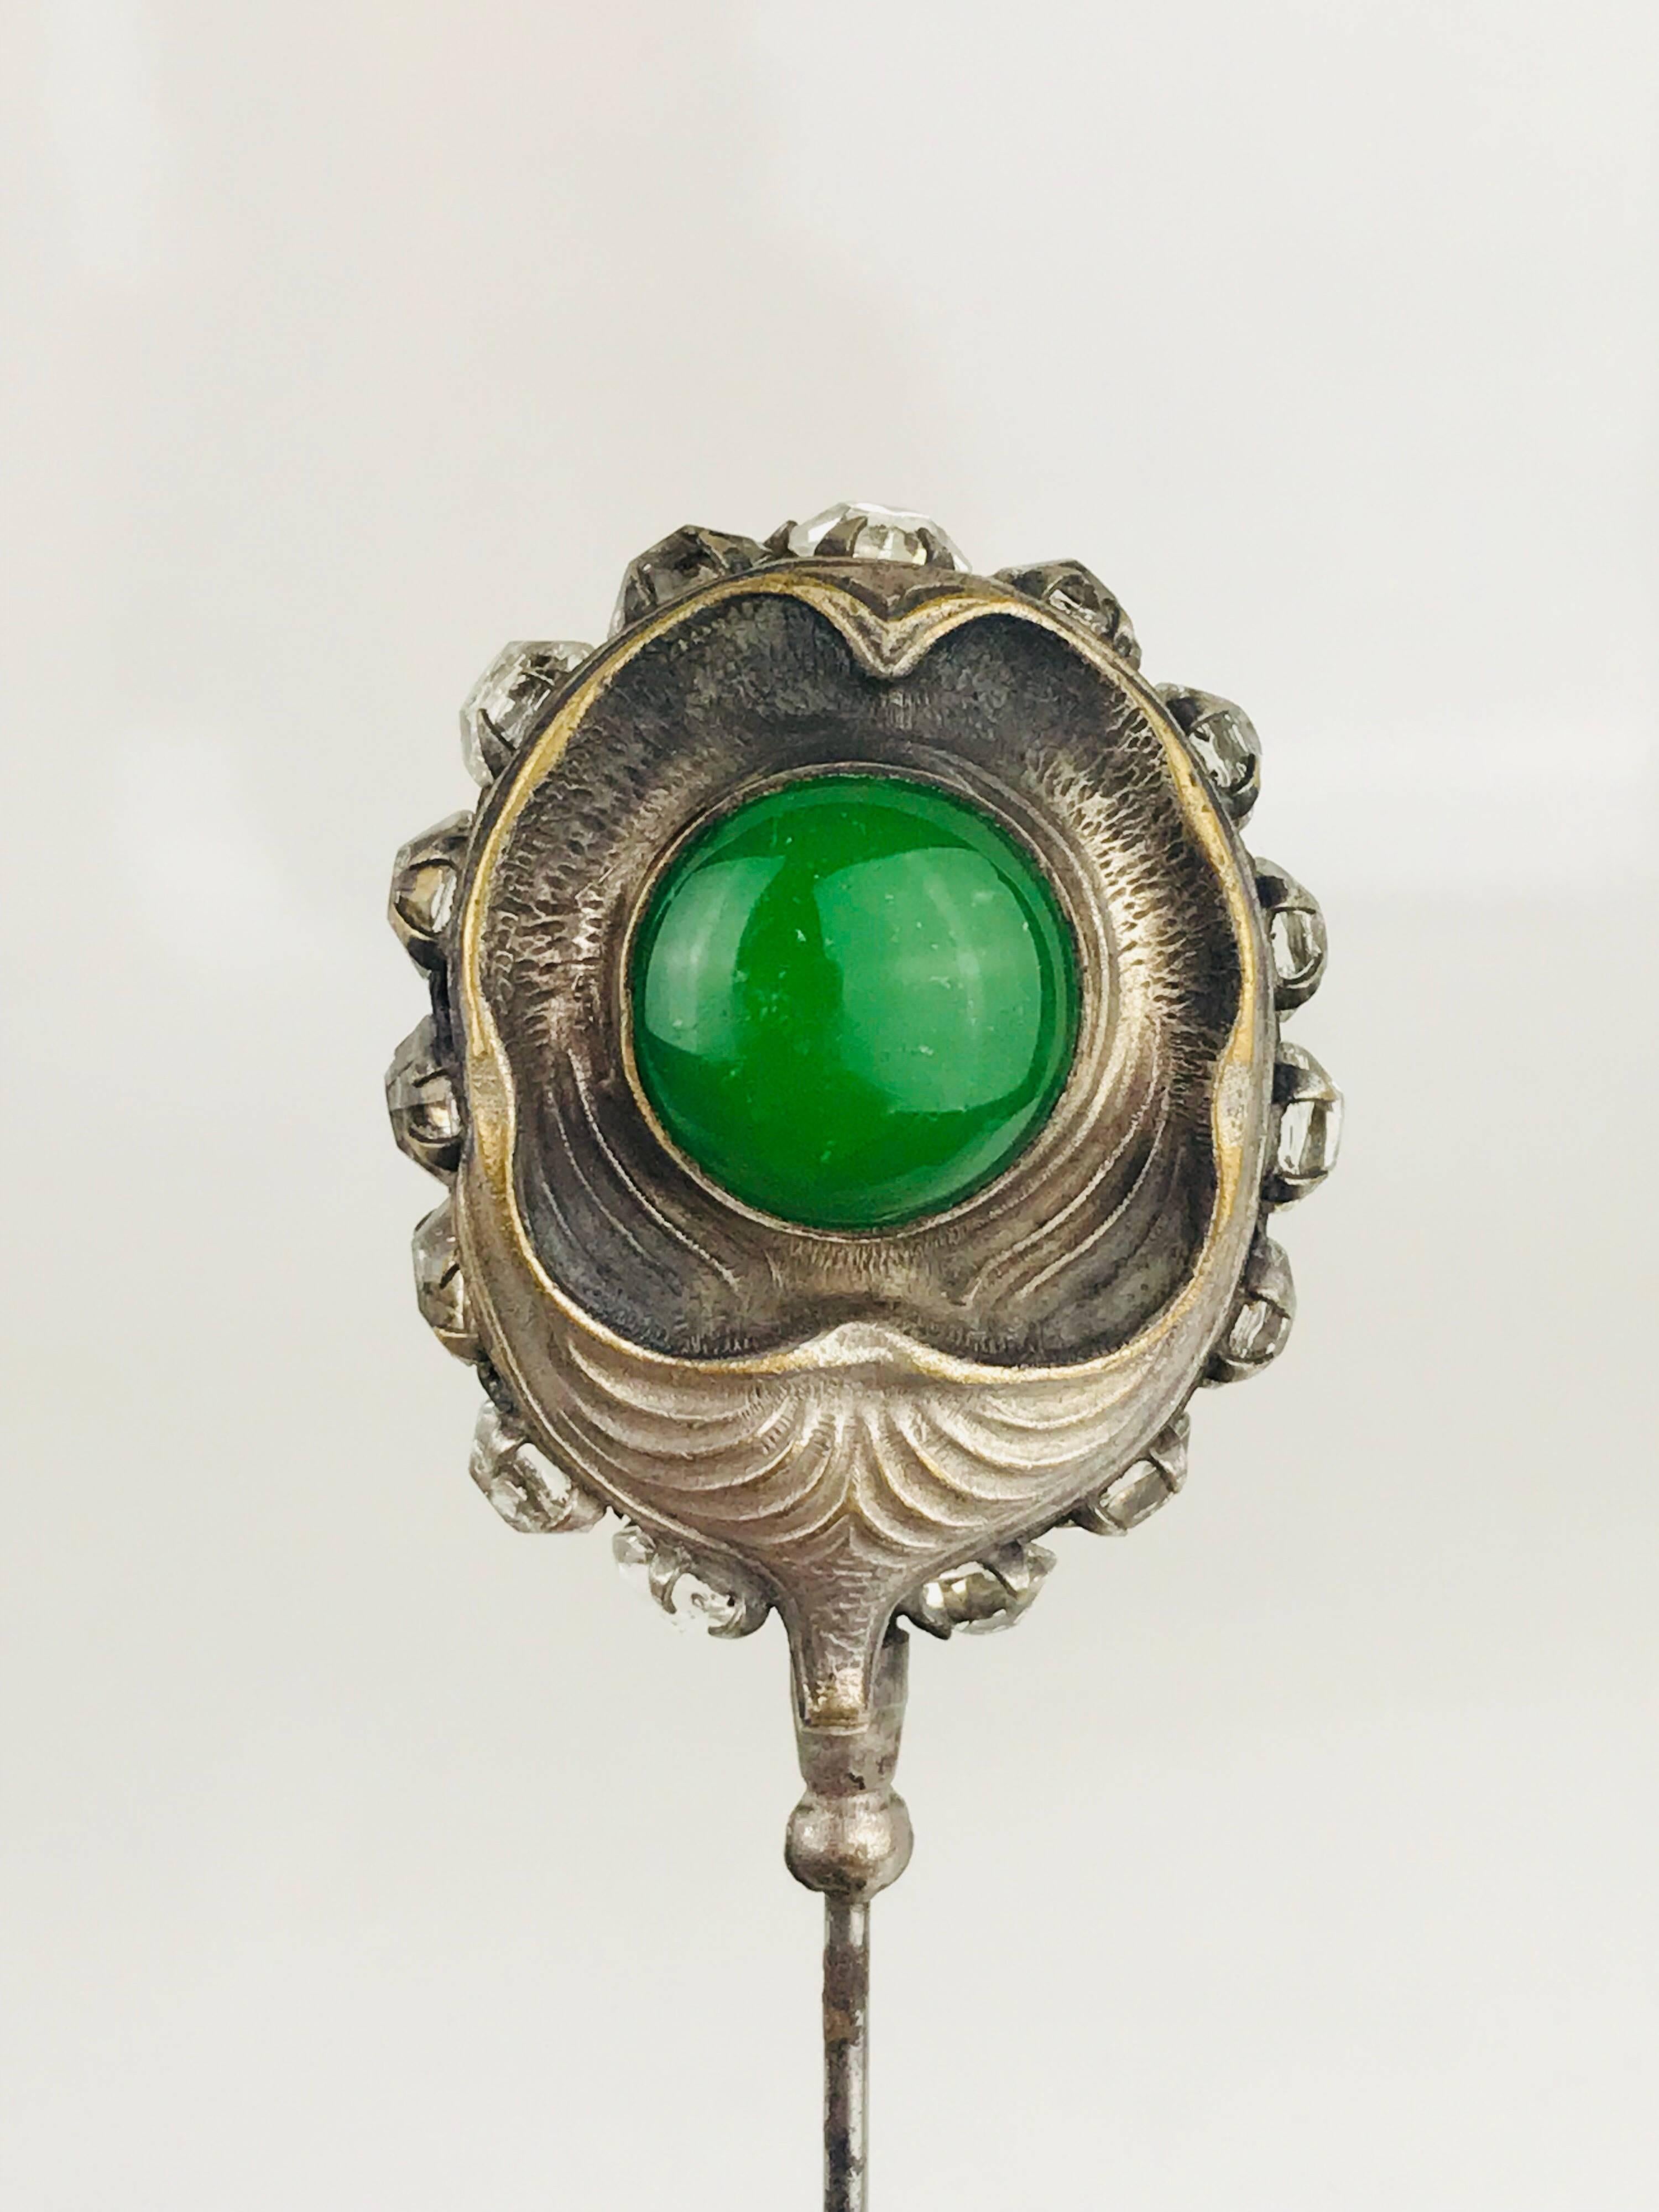 Sterling silver Victorian hat pin, circa 1840, features two large, bezel-set green cabochons  and 15 rose-cut, prong-set rhinestones.  Pinhead is identical on both sides.

Hat pin measures 6.56